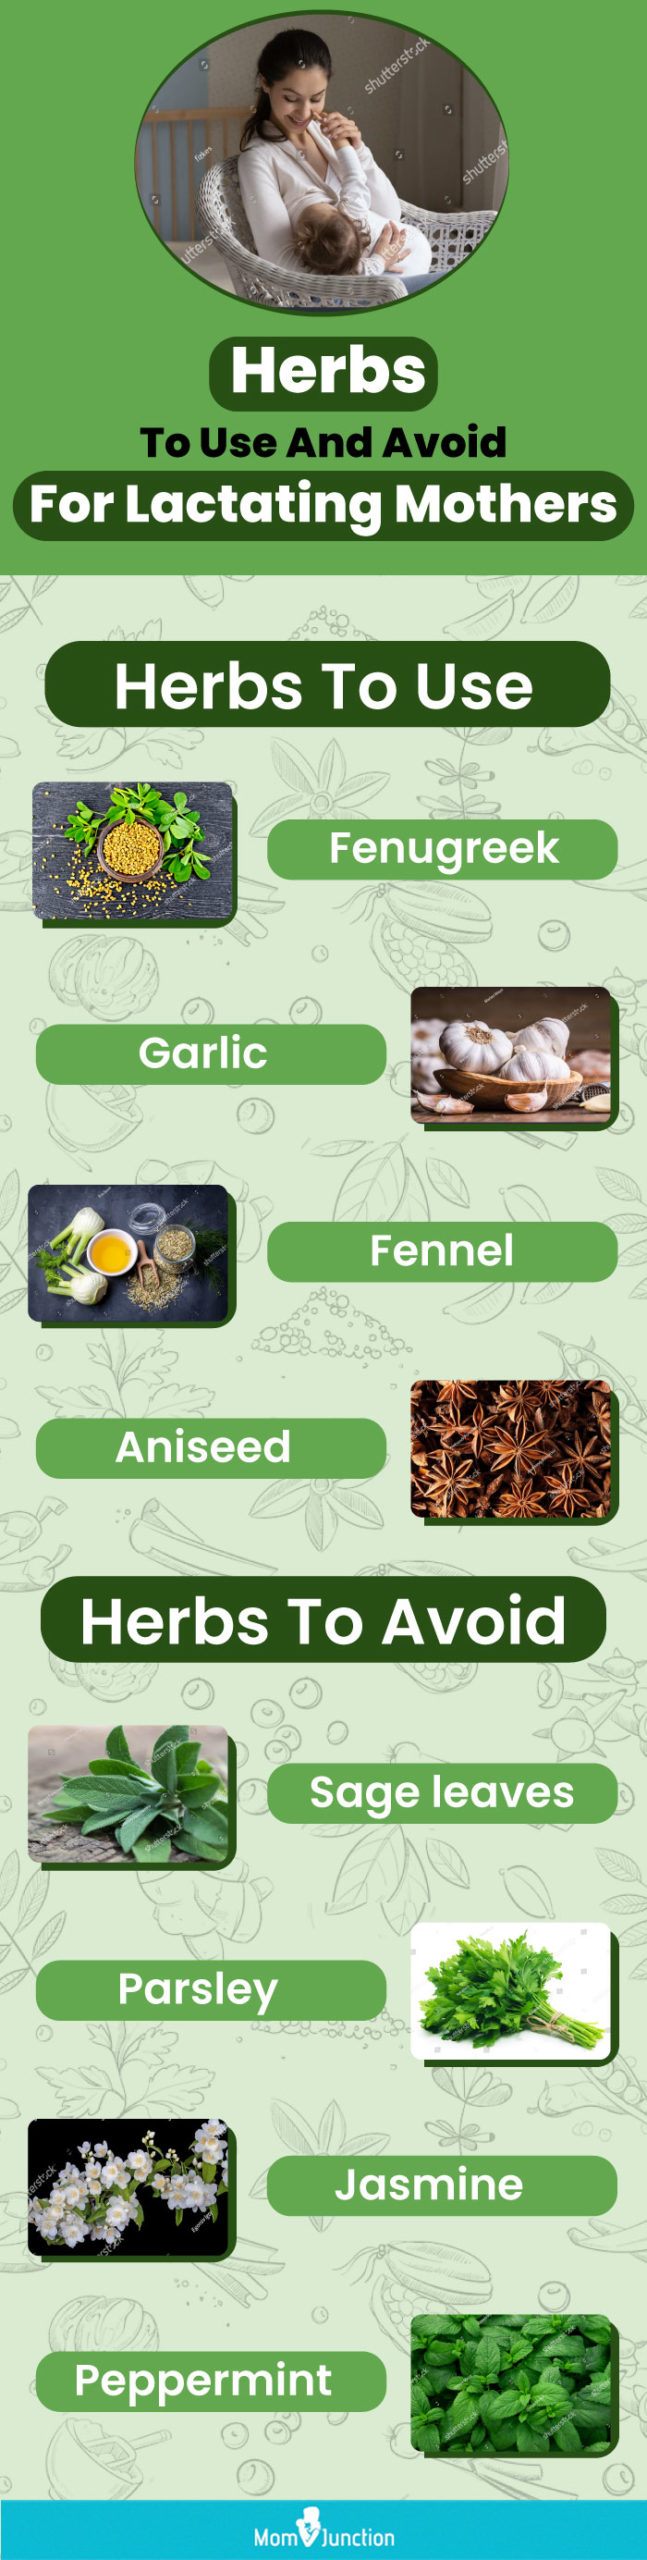 herbs to use and avoid for lactating mothers (infographic)